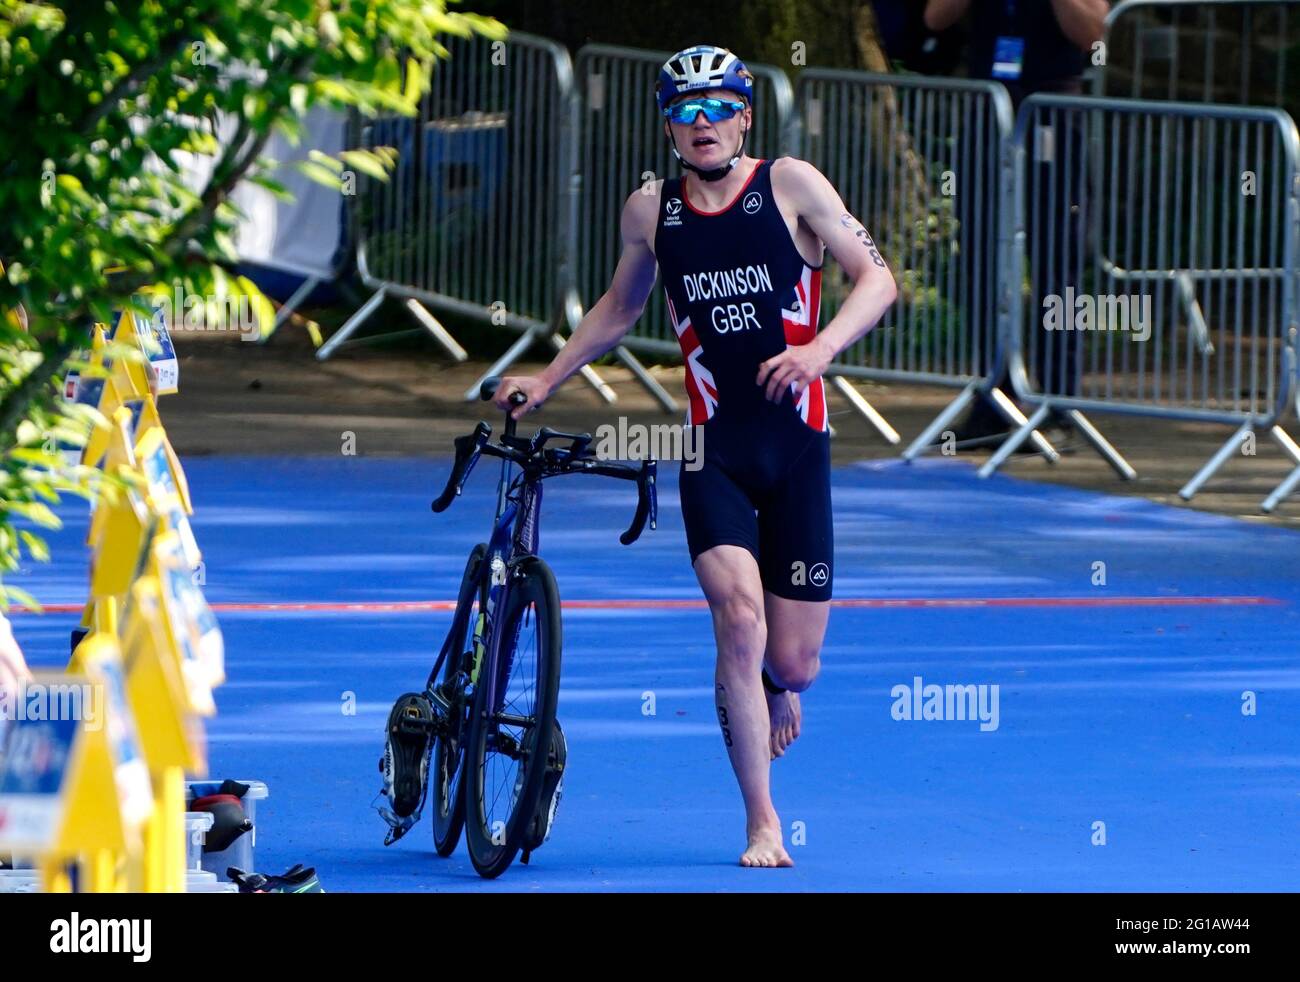 Great Britain's Samuel Dickinson in action during The AJ Bell 2021 World Triathlon Championship Series Mens Race during day 2 of the 2021 ITU World Triathlon Series Event in Leeds. Picture date: Sunday June 6, 2021. Stock Photo